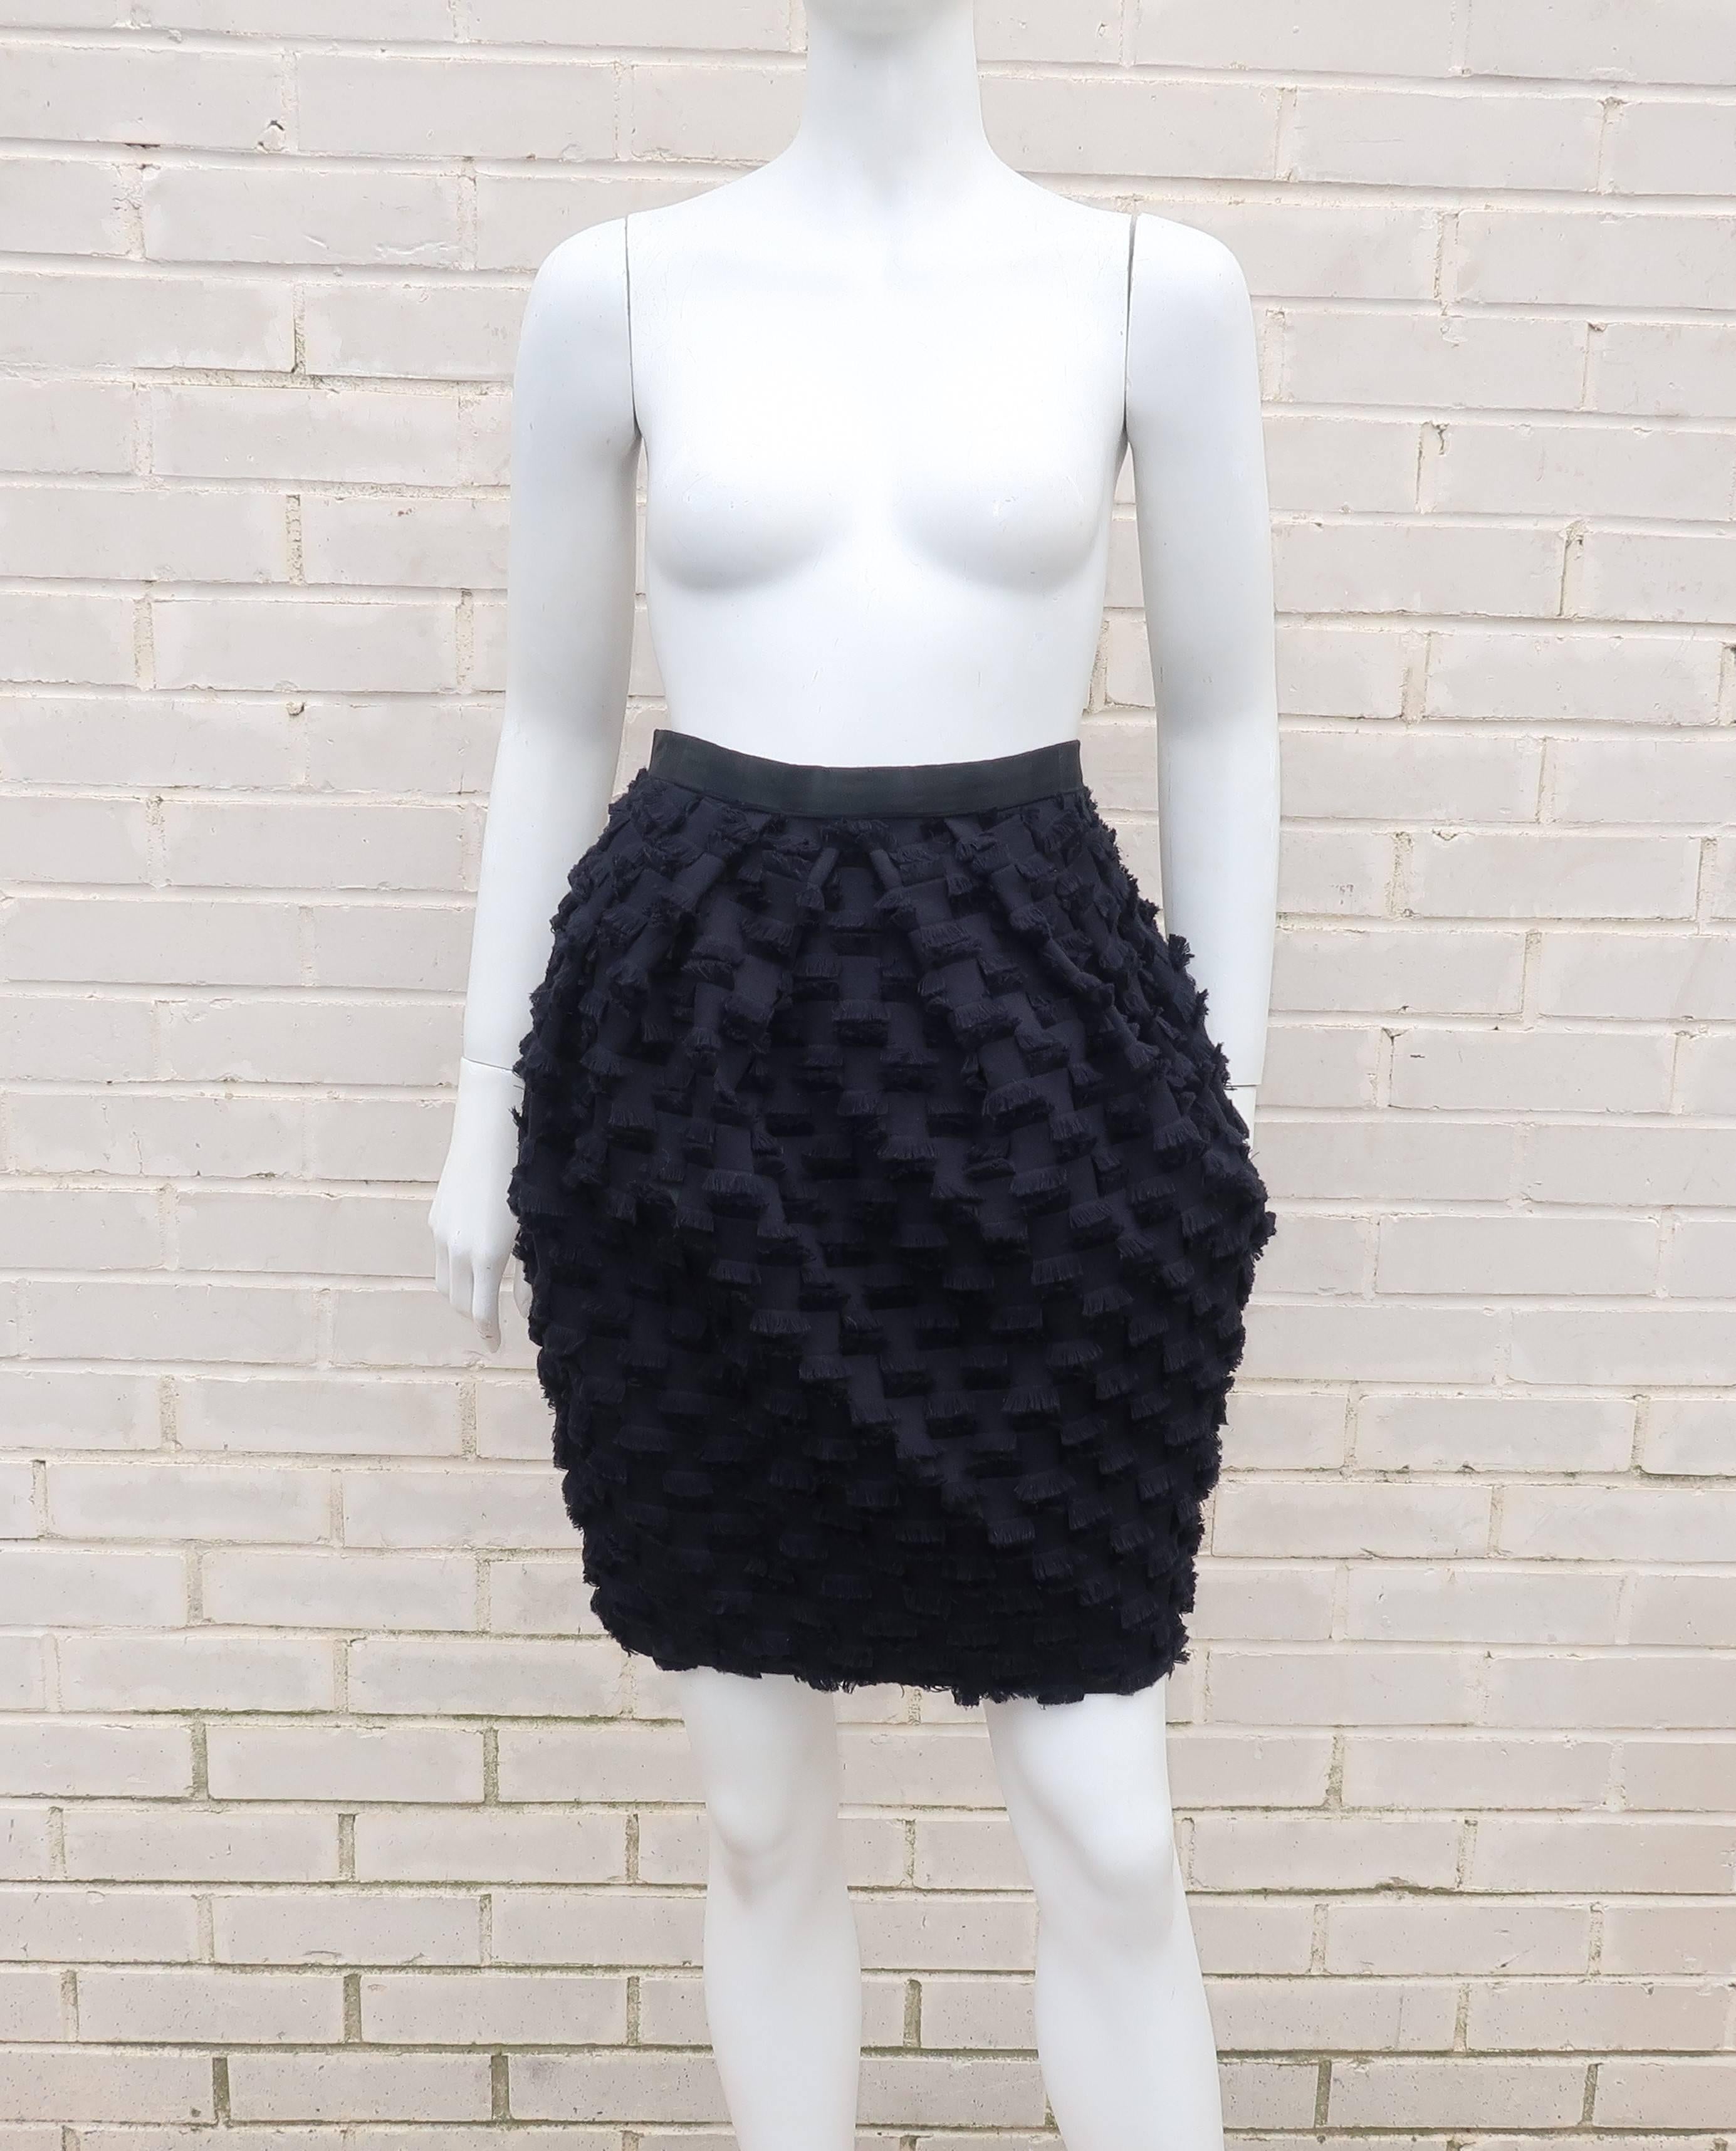 This Saks Fifth Avenue bubble skirt is a tactile delight.  The black fabric is a patchwork blend of a casual weight cotton and dressier satin with allover eyelash style fringe.  It zips and hooks at the back with inverted pleats at the front